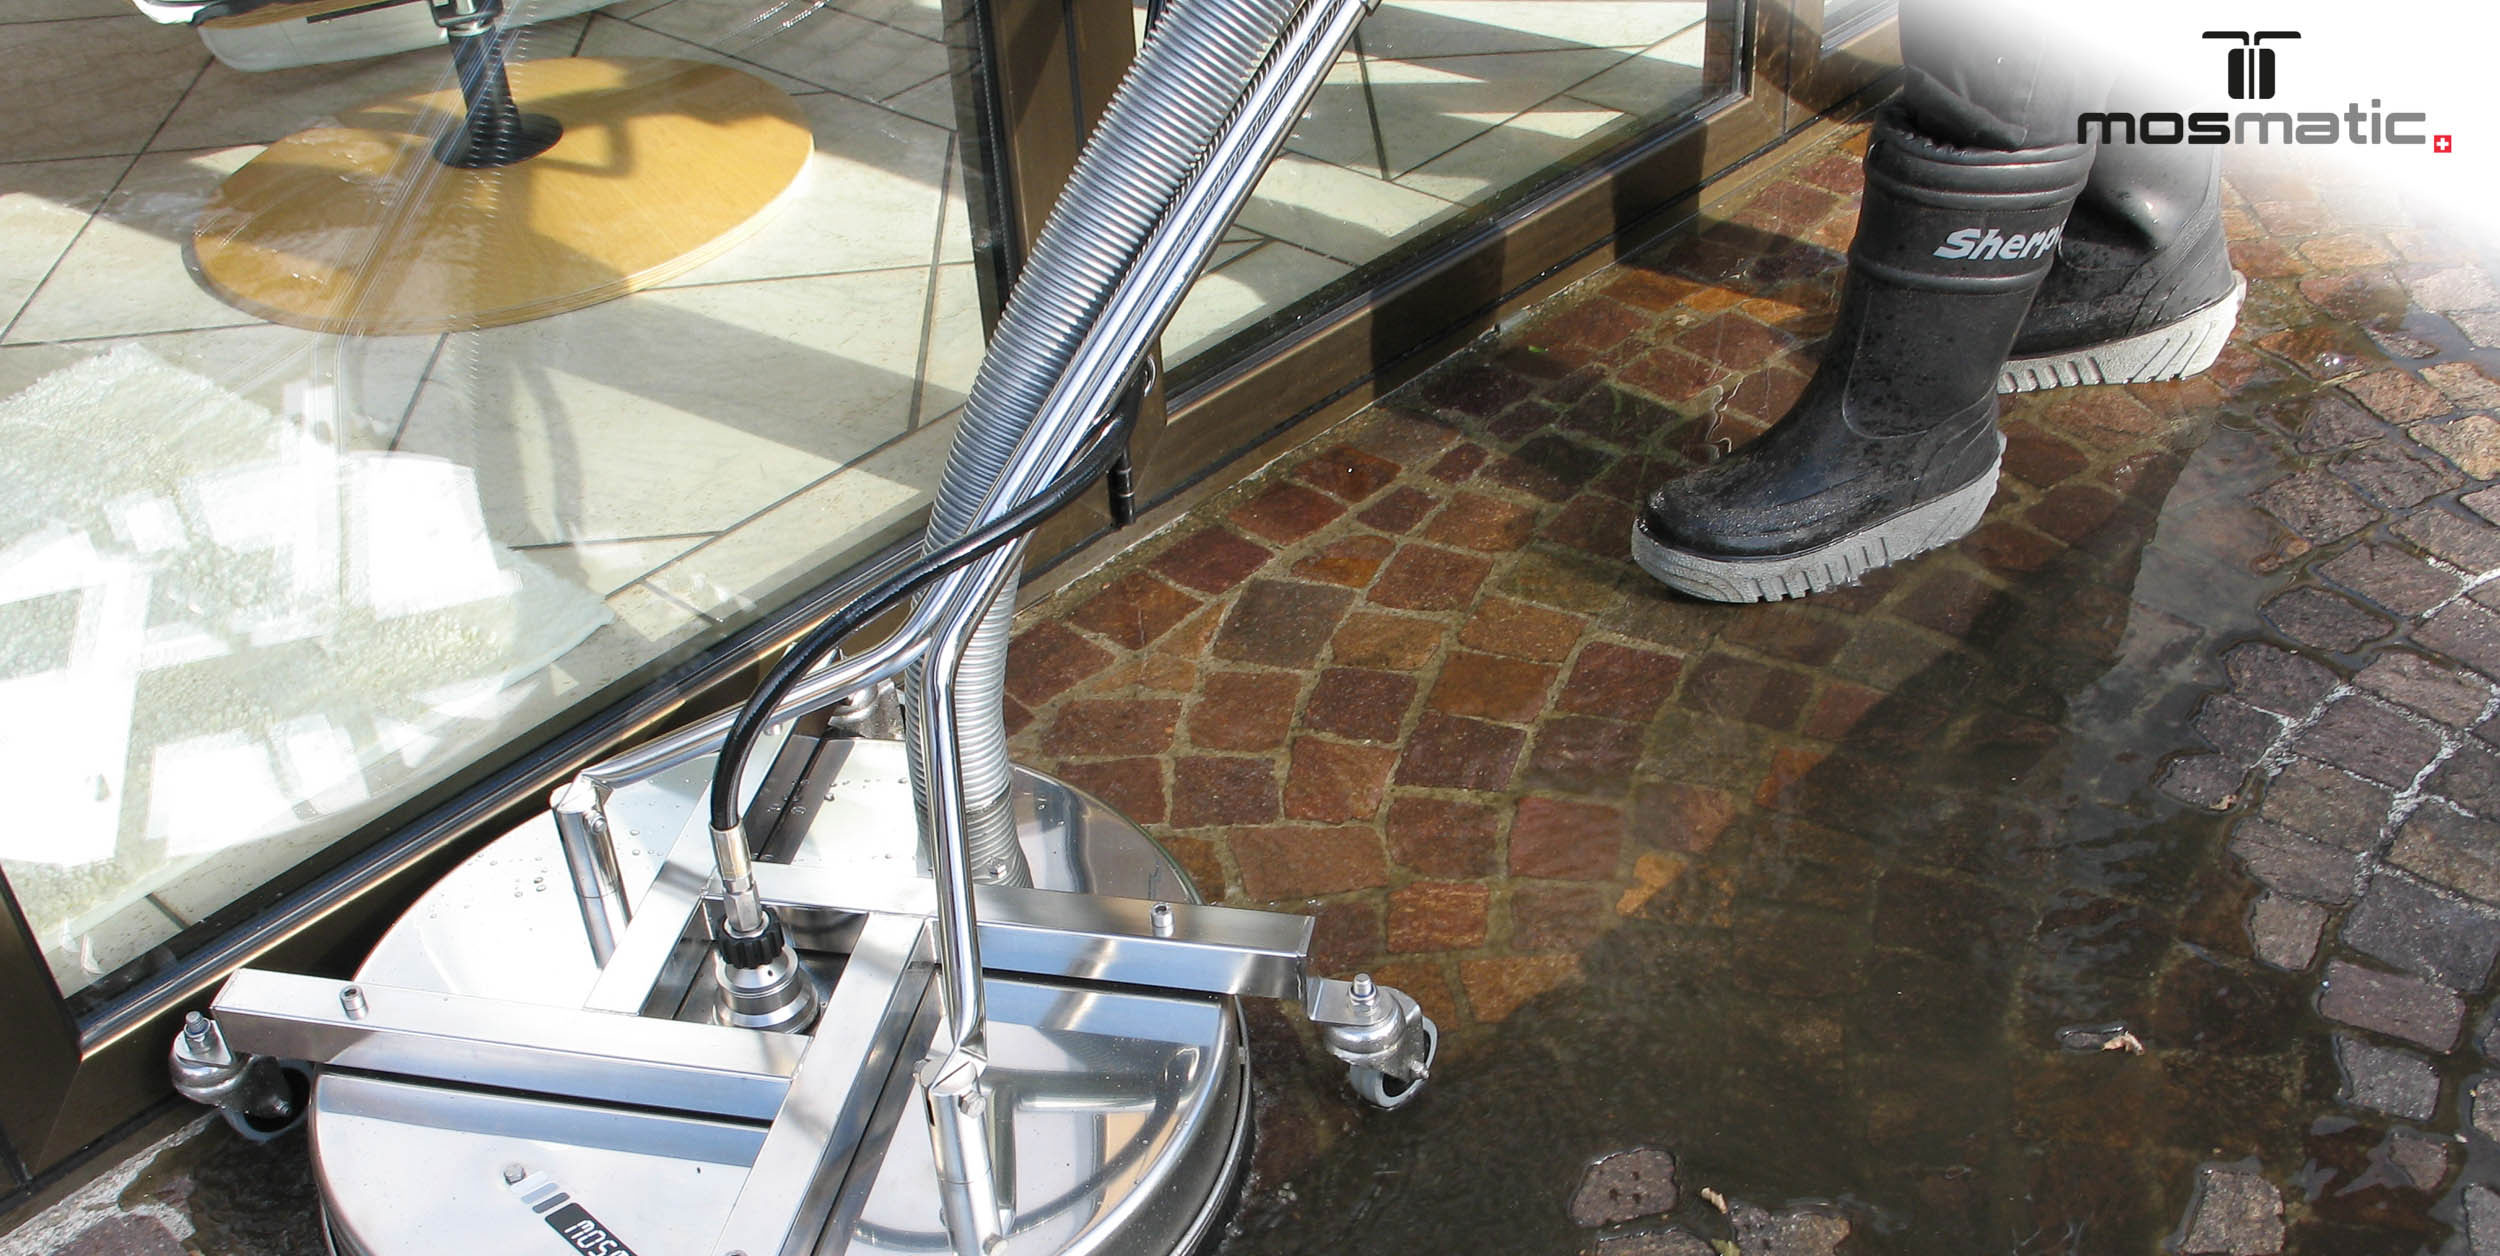 Mosmatic surface cleaner cleaning tiles